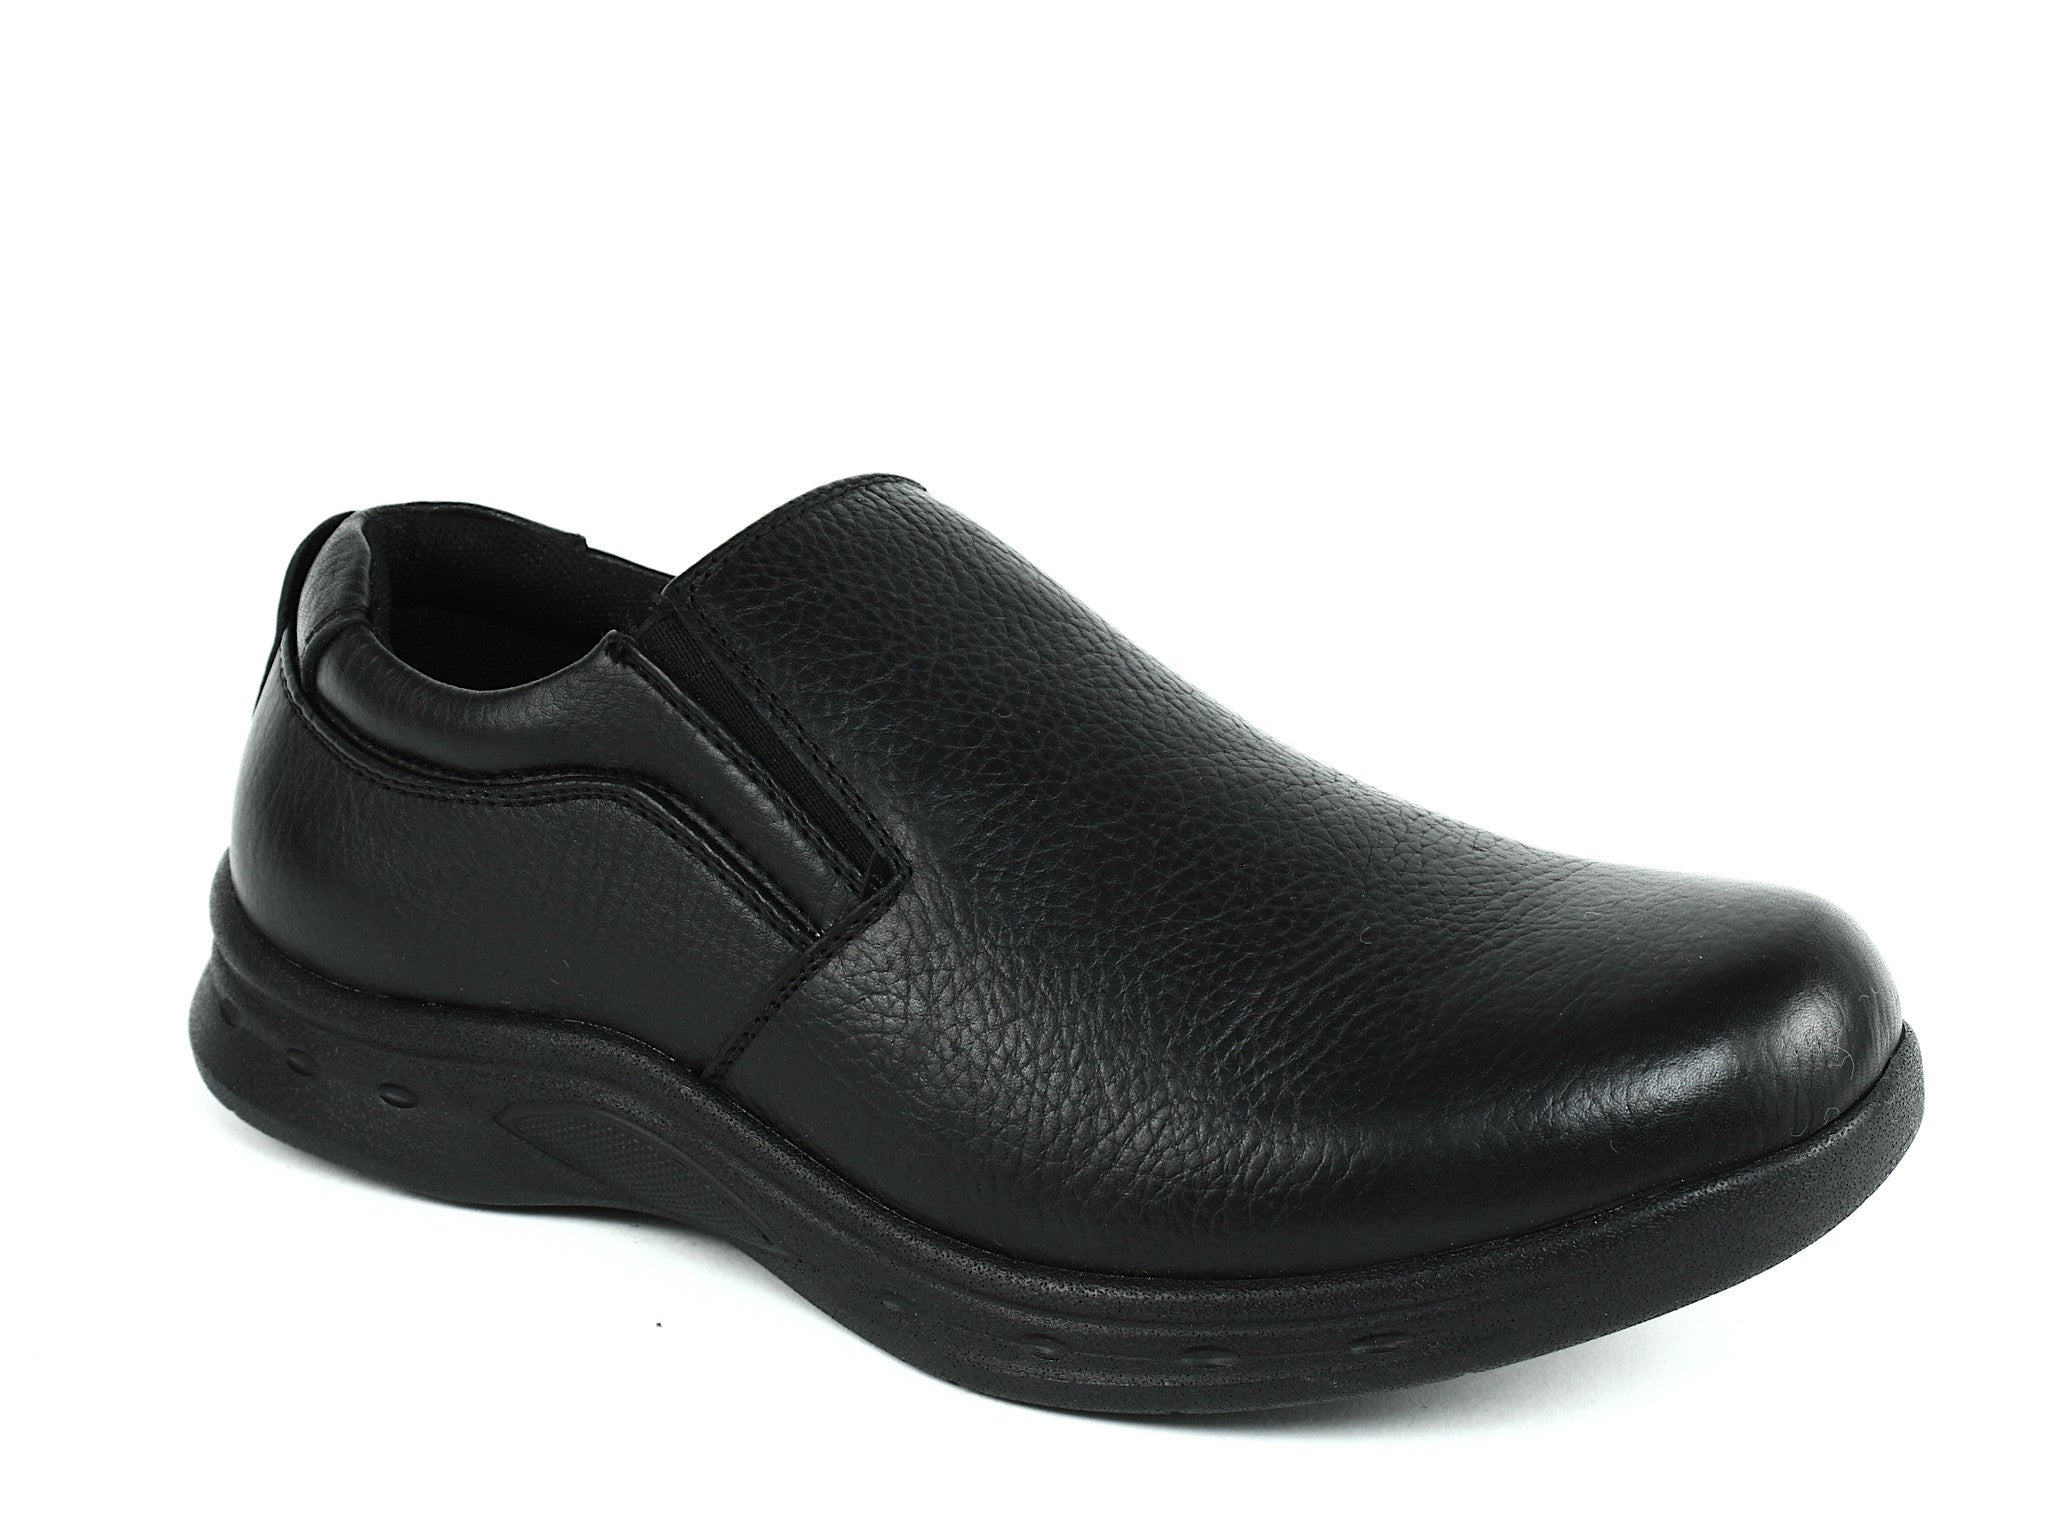 most comfortable men's casual slip on shoes